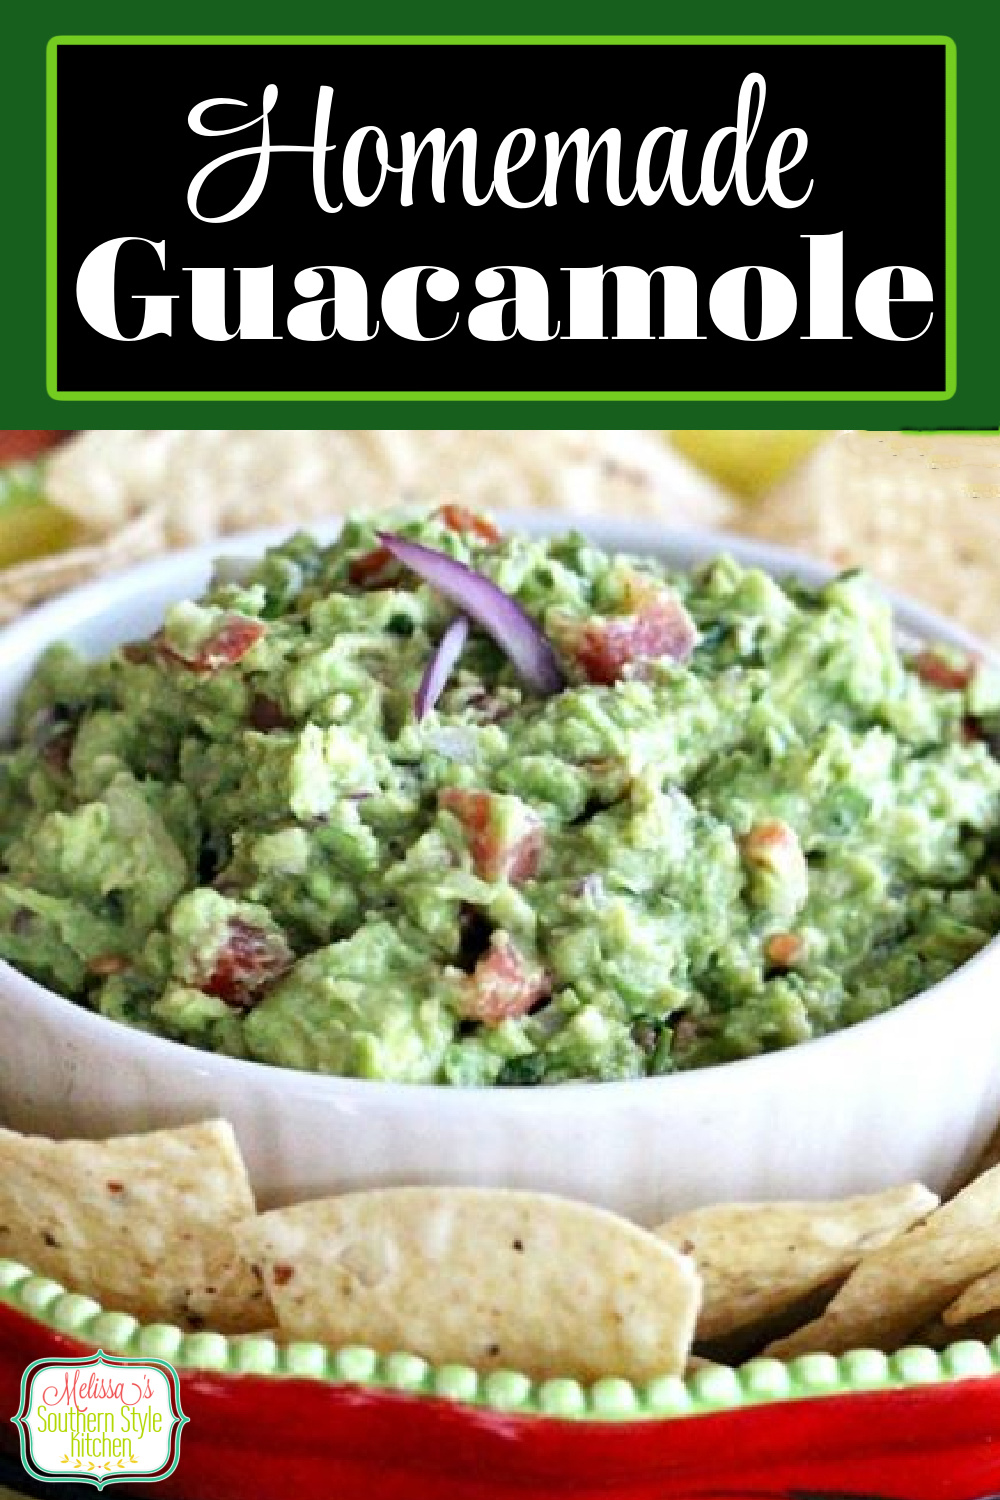 There's nothing like a generous dollop of Fresh Guacamole on tacos, salads or with tortilla chips for dipping #guacamole #freshquacamole #lowcarb #lowcarbrecipes #partyfood #bestguacamolerecipe #appetizers #diprecipes #avocados #avocadorecipes #southernfood #southernrecipes via @melissasssk